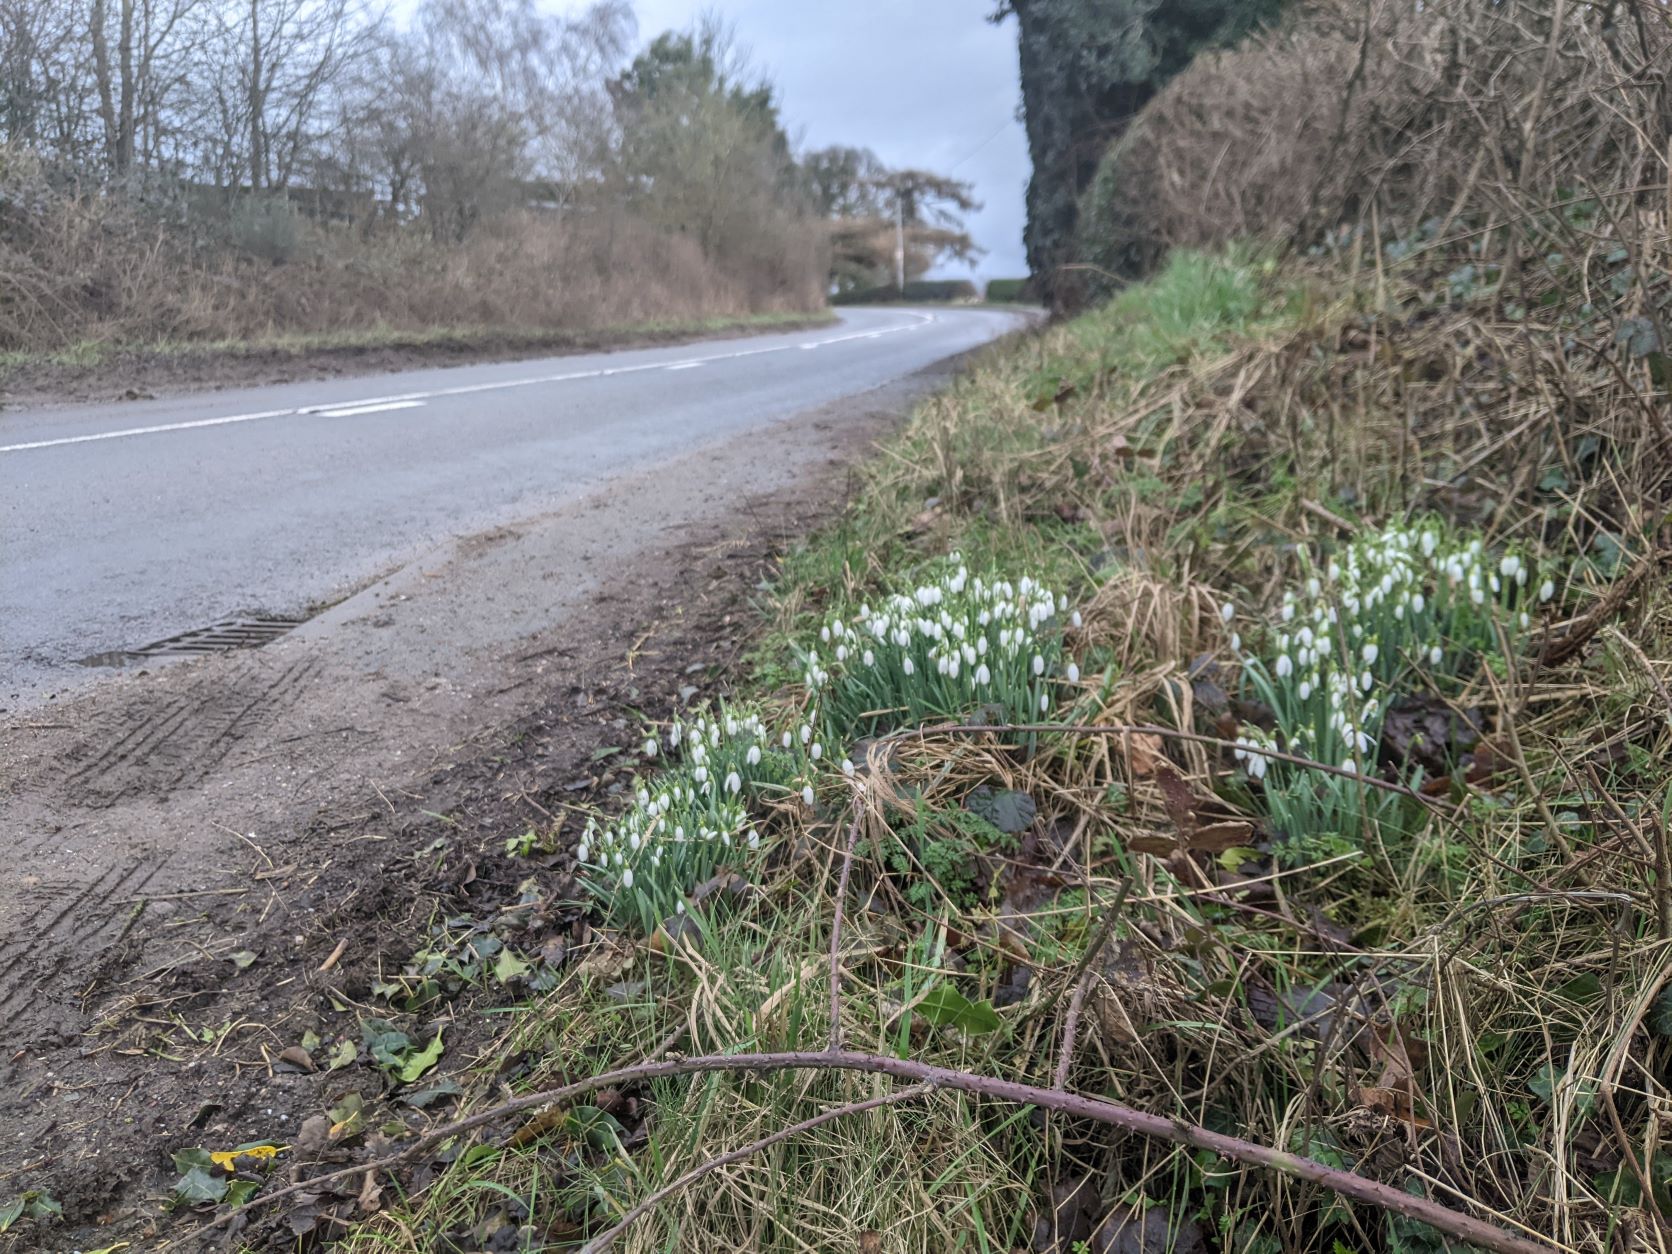 Snowdrops on South Approach, February 20th